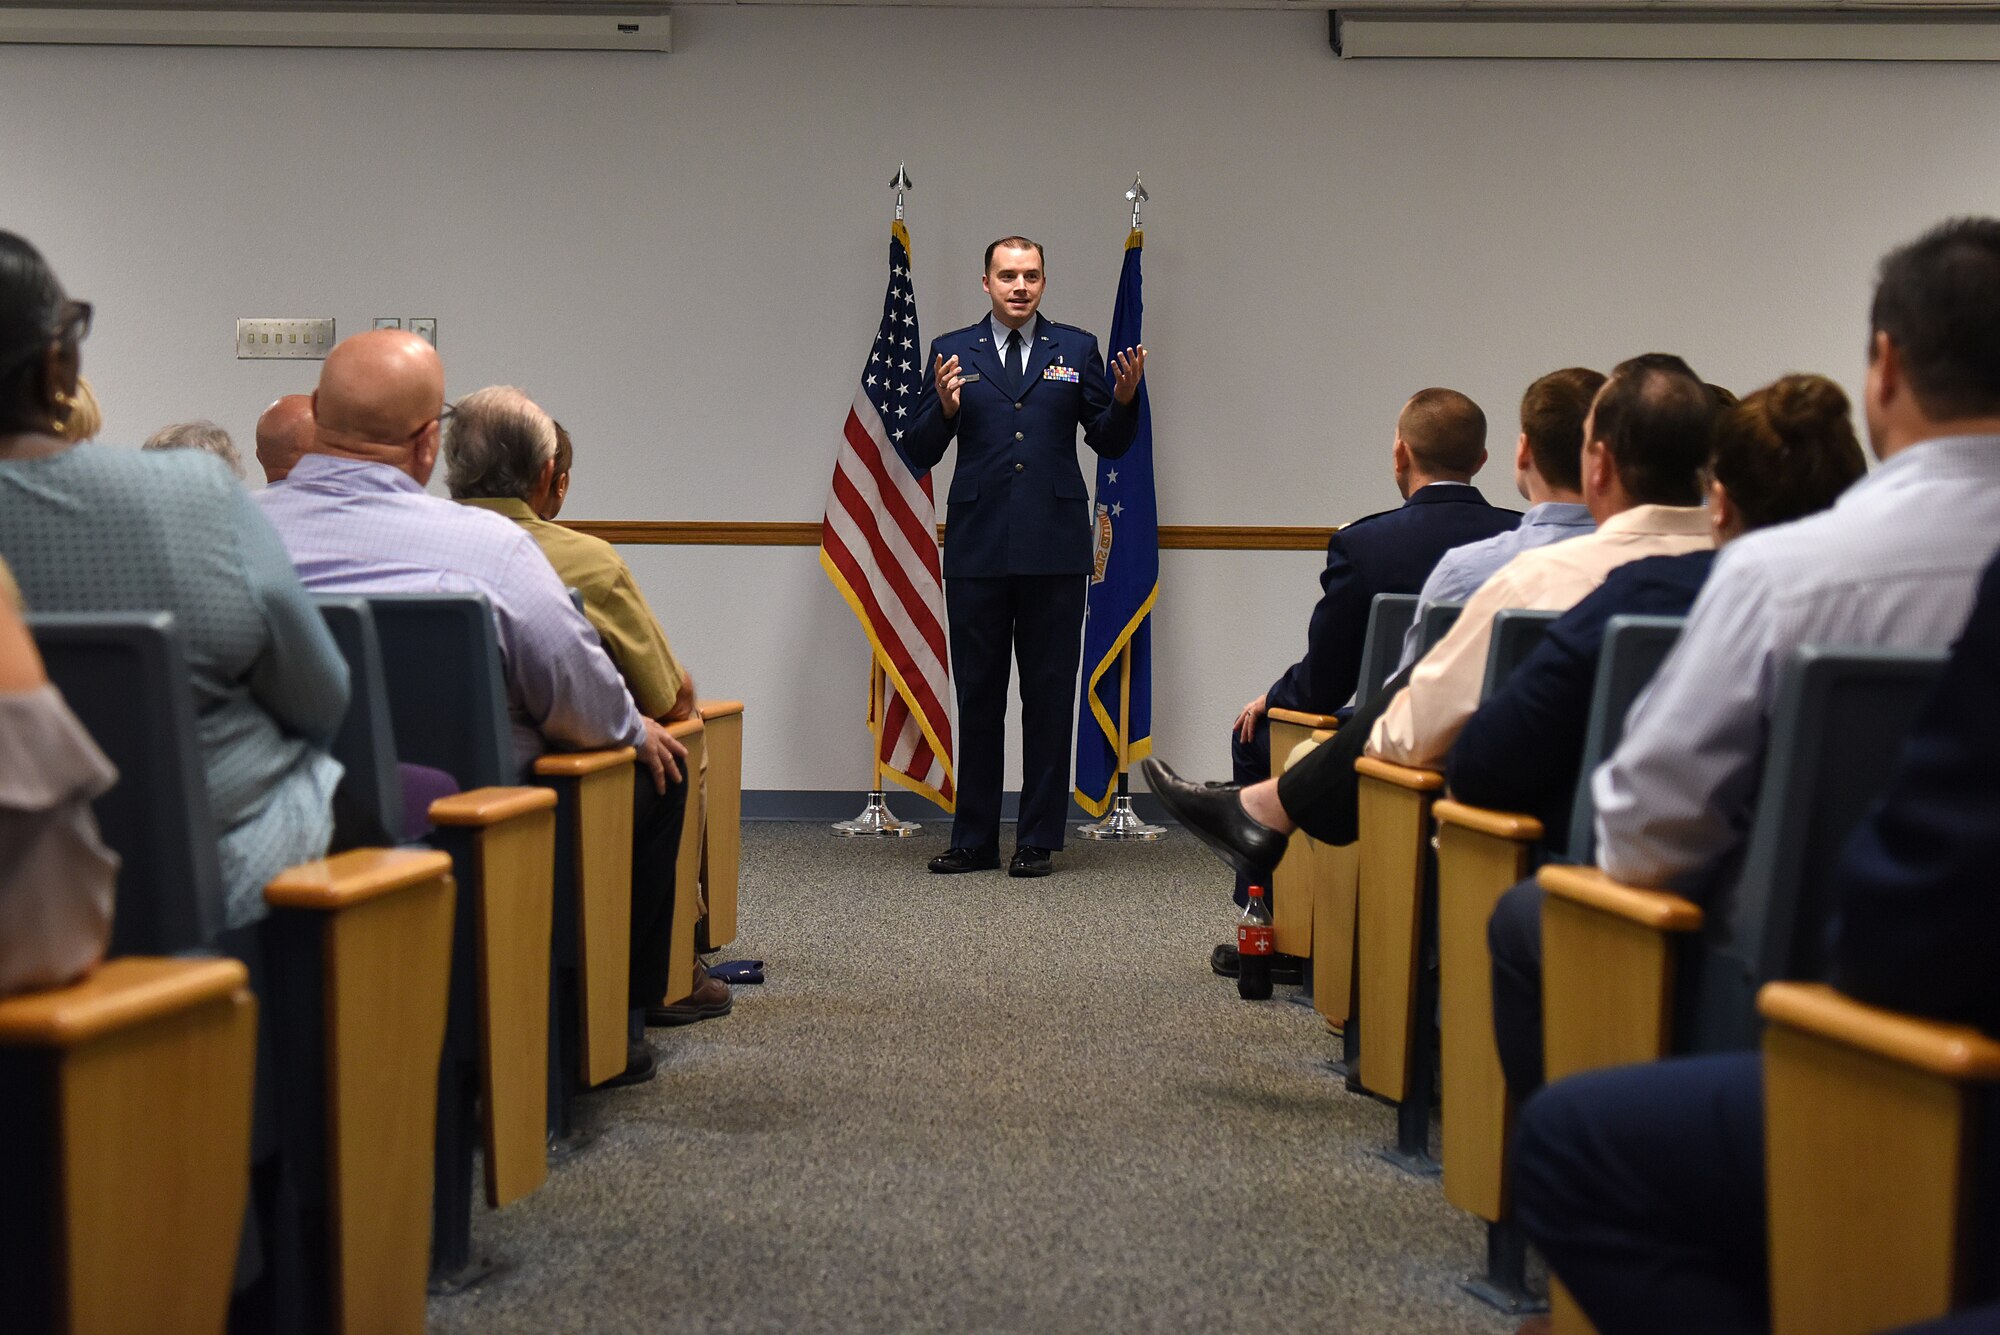 U.S. Air Force Chaplain (Capt.) John Reutemann, 81st Training Wing chaplain, gives remarks during the Sablich Center Auditorium room dedication ceremony for George Budz inside the Sablich Center at Keesler Air Force Base, Mississippi, Oct. 31, 2019. The auditorium has been renamed after Budz who passed away Aug. 3, 2018. Budz served as the 81st Contracting Squadron commander, the 81st Mission Support Group deputy commander and worked nine years in civil service after he retired as a lieutenant colonel. (U.S. Air Force photo by Senior Airman Suzie Plotnikov)